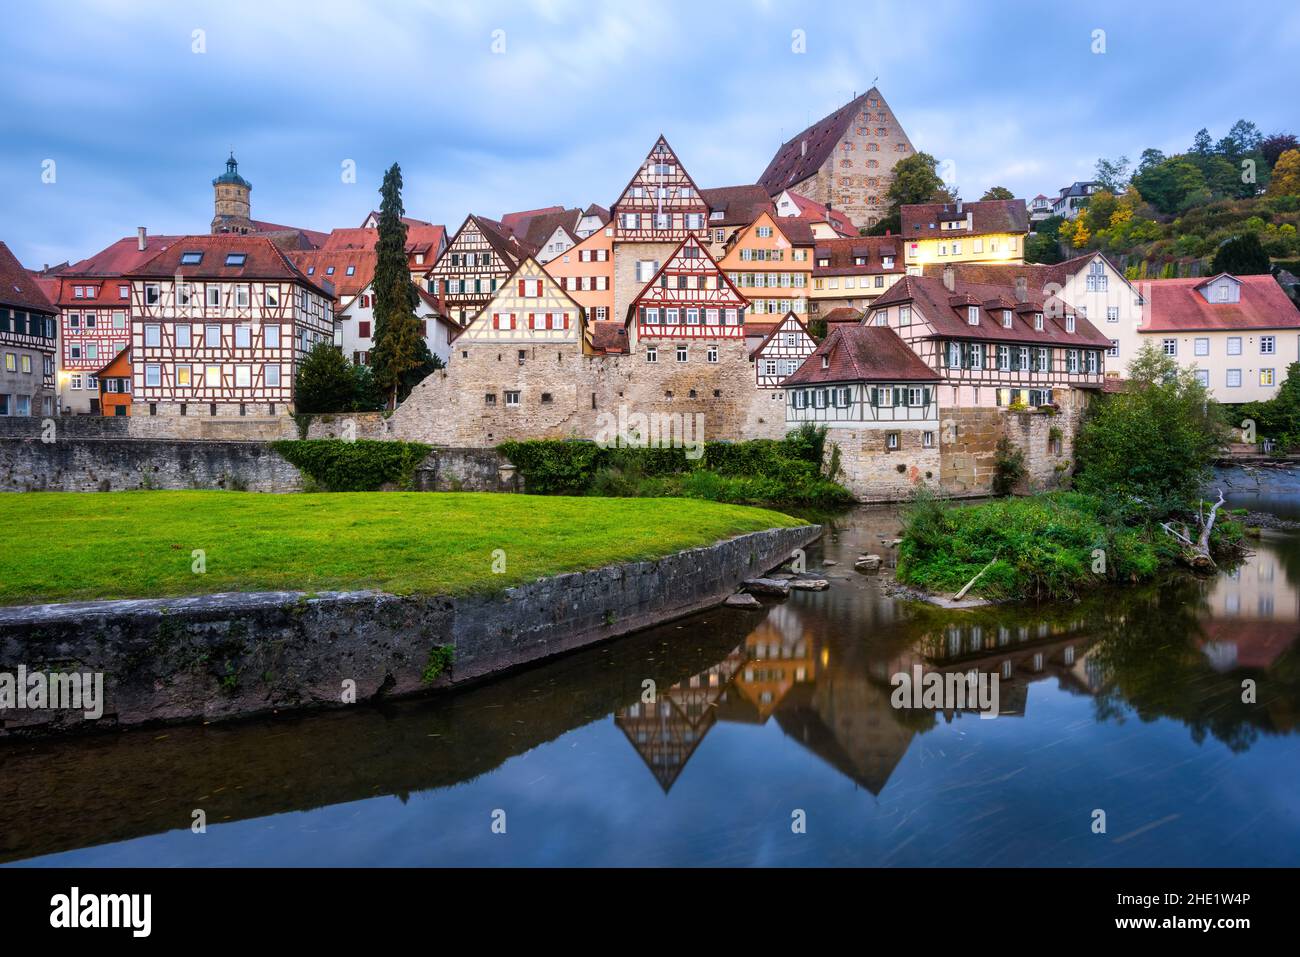 Gothic half-timbered houses reflecting in blue river in the Schwabisch Hall city Old town, Germany Stock Photo